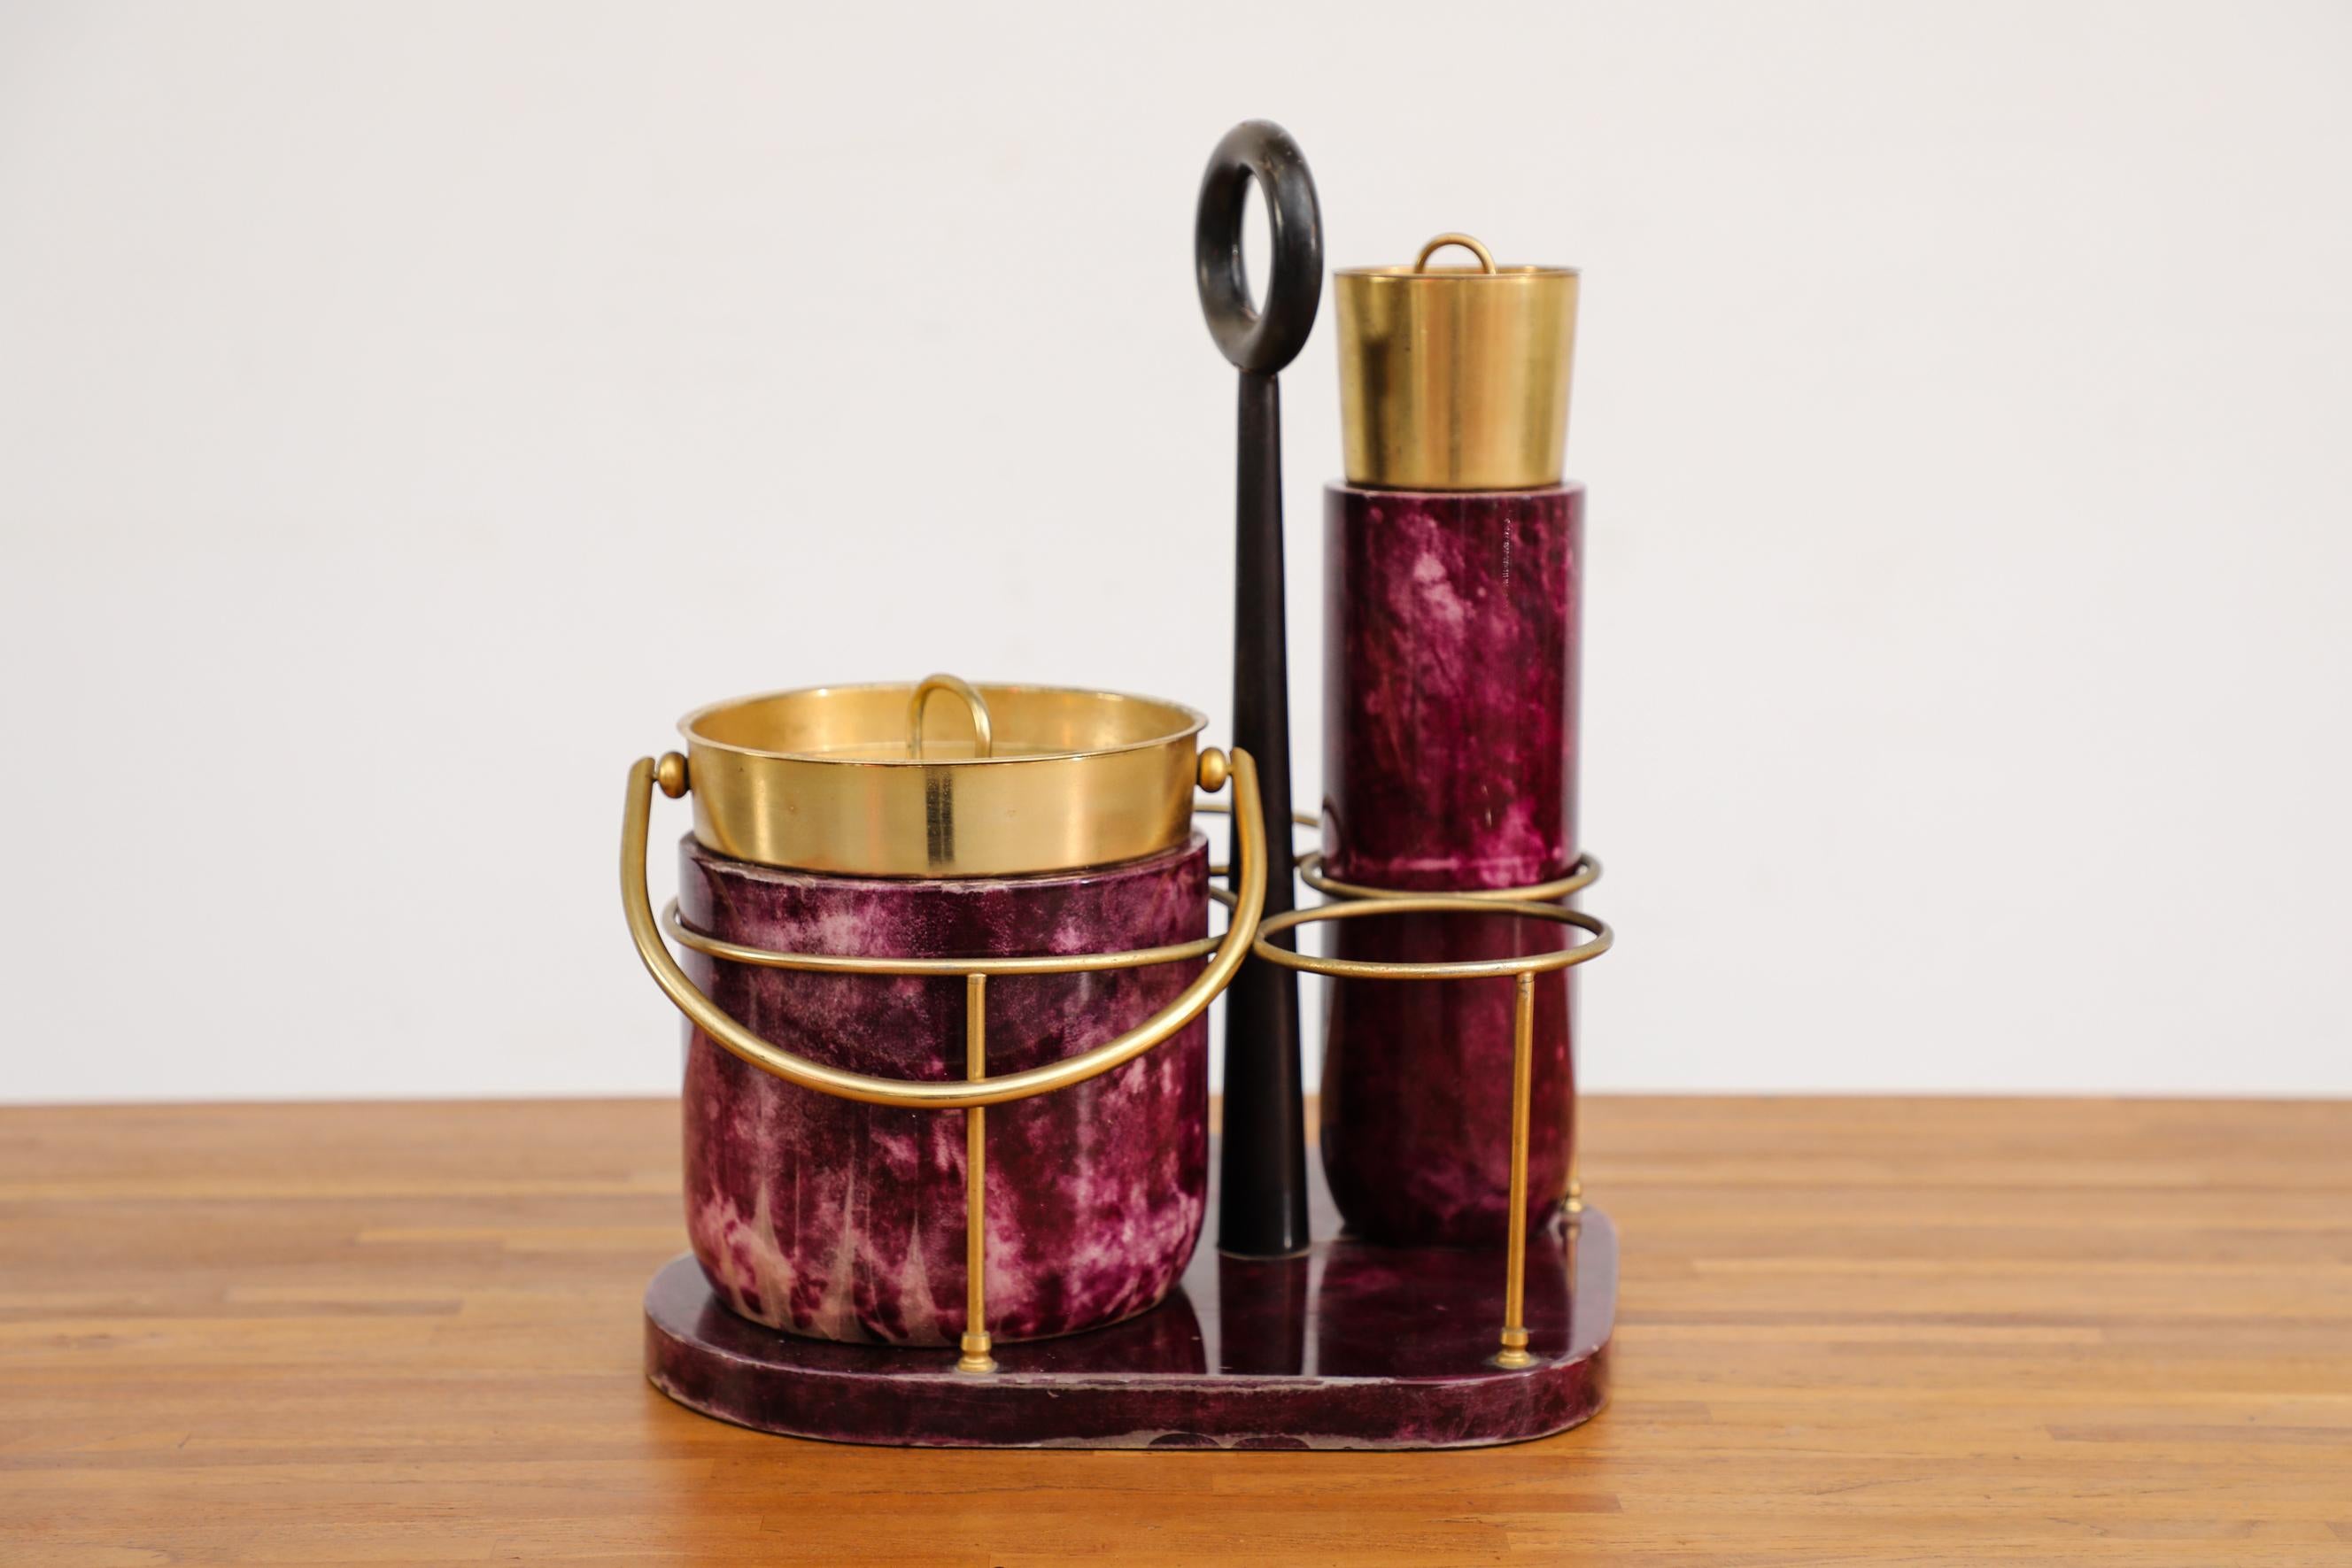 1970's Aldo Tura Cocktail Set with carrier, ice bucket, and cocktail shaker in purple dyed goat skin and brass. Tura focused almost exclusively on lacquered goatskin, applying it to an array of glamorous products for the home. Chocolate brown is